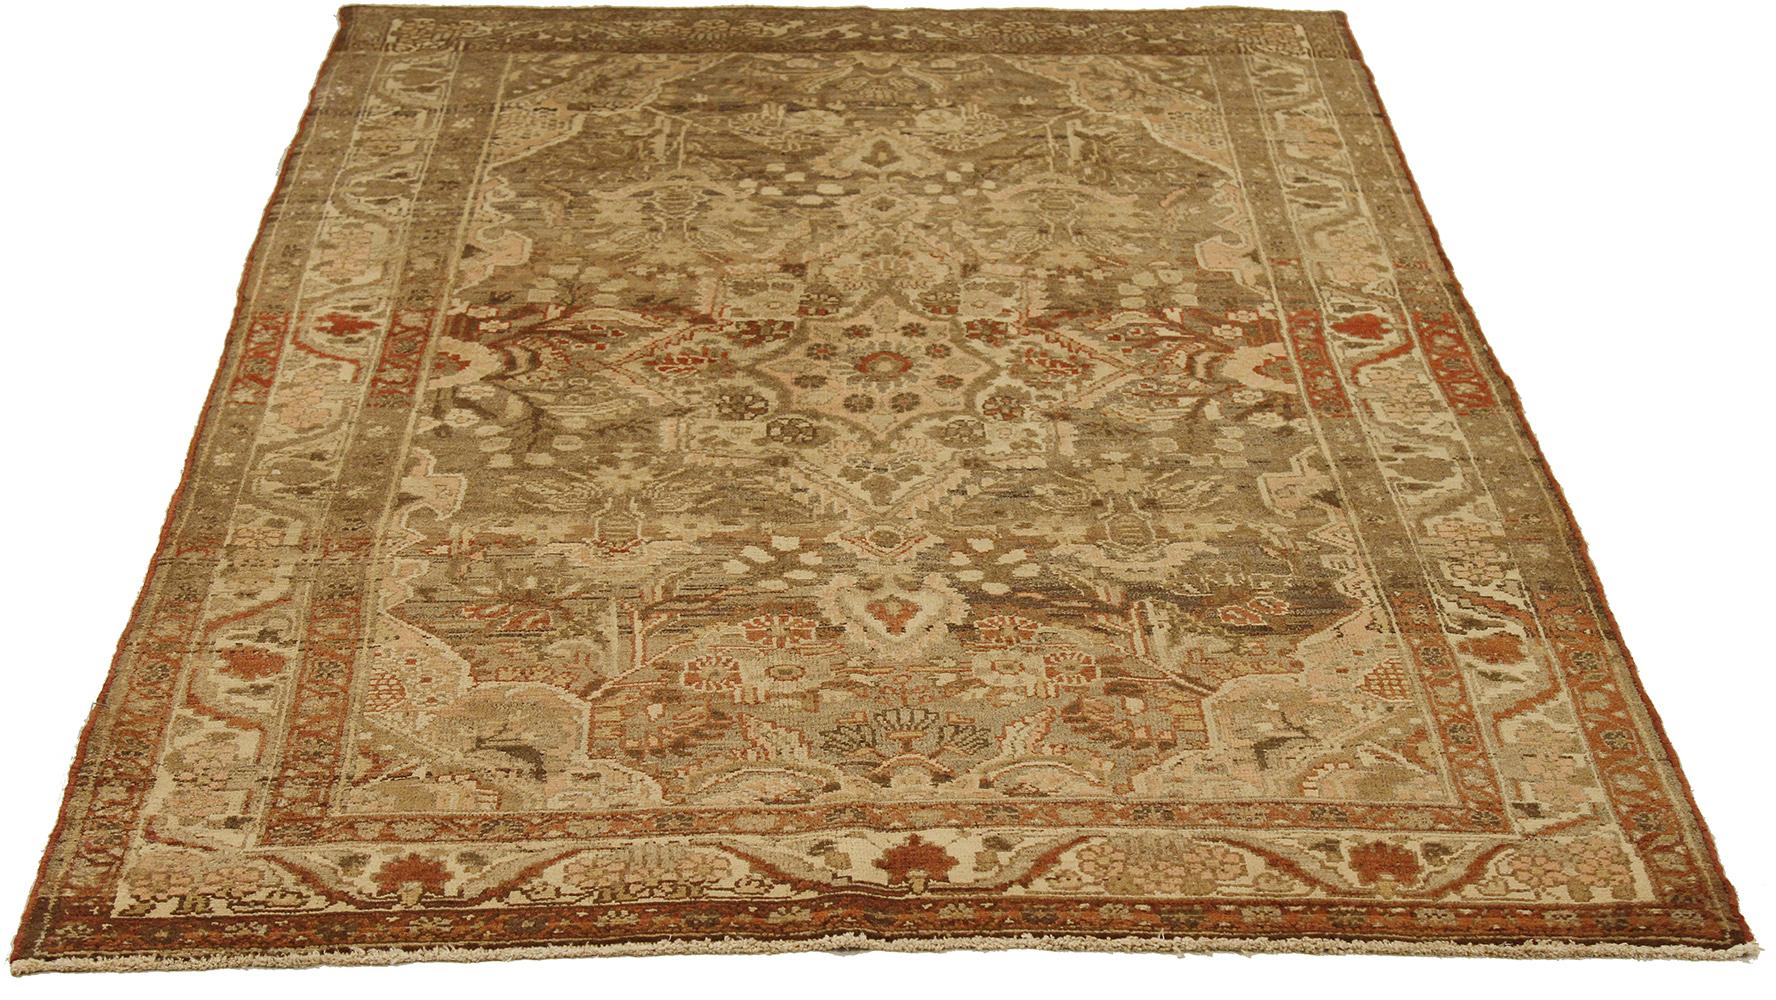 Antique Persian rug handwoven from the finest sheep’s wool and colored with all-natural vegetable dyes that are safe for humans and pets. It’s a traditional Mehraban design featuring a beautiful mix of brown, beige, and gray tribal details on an